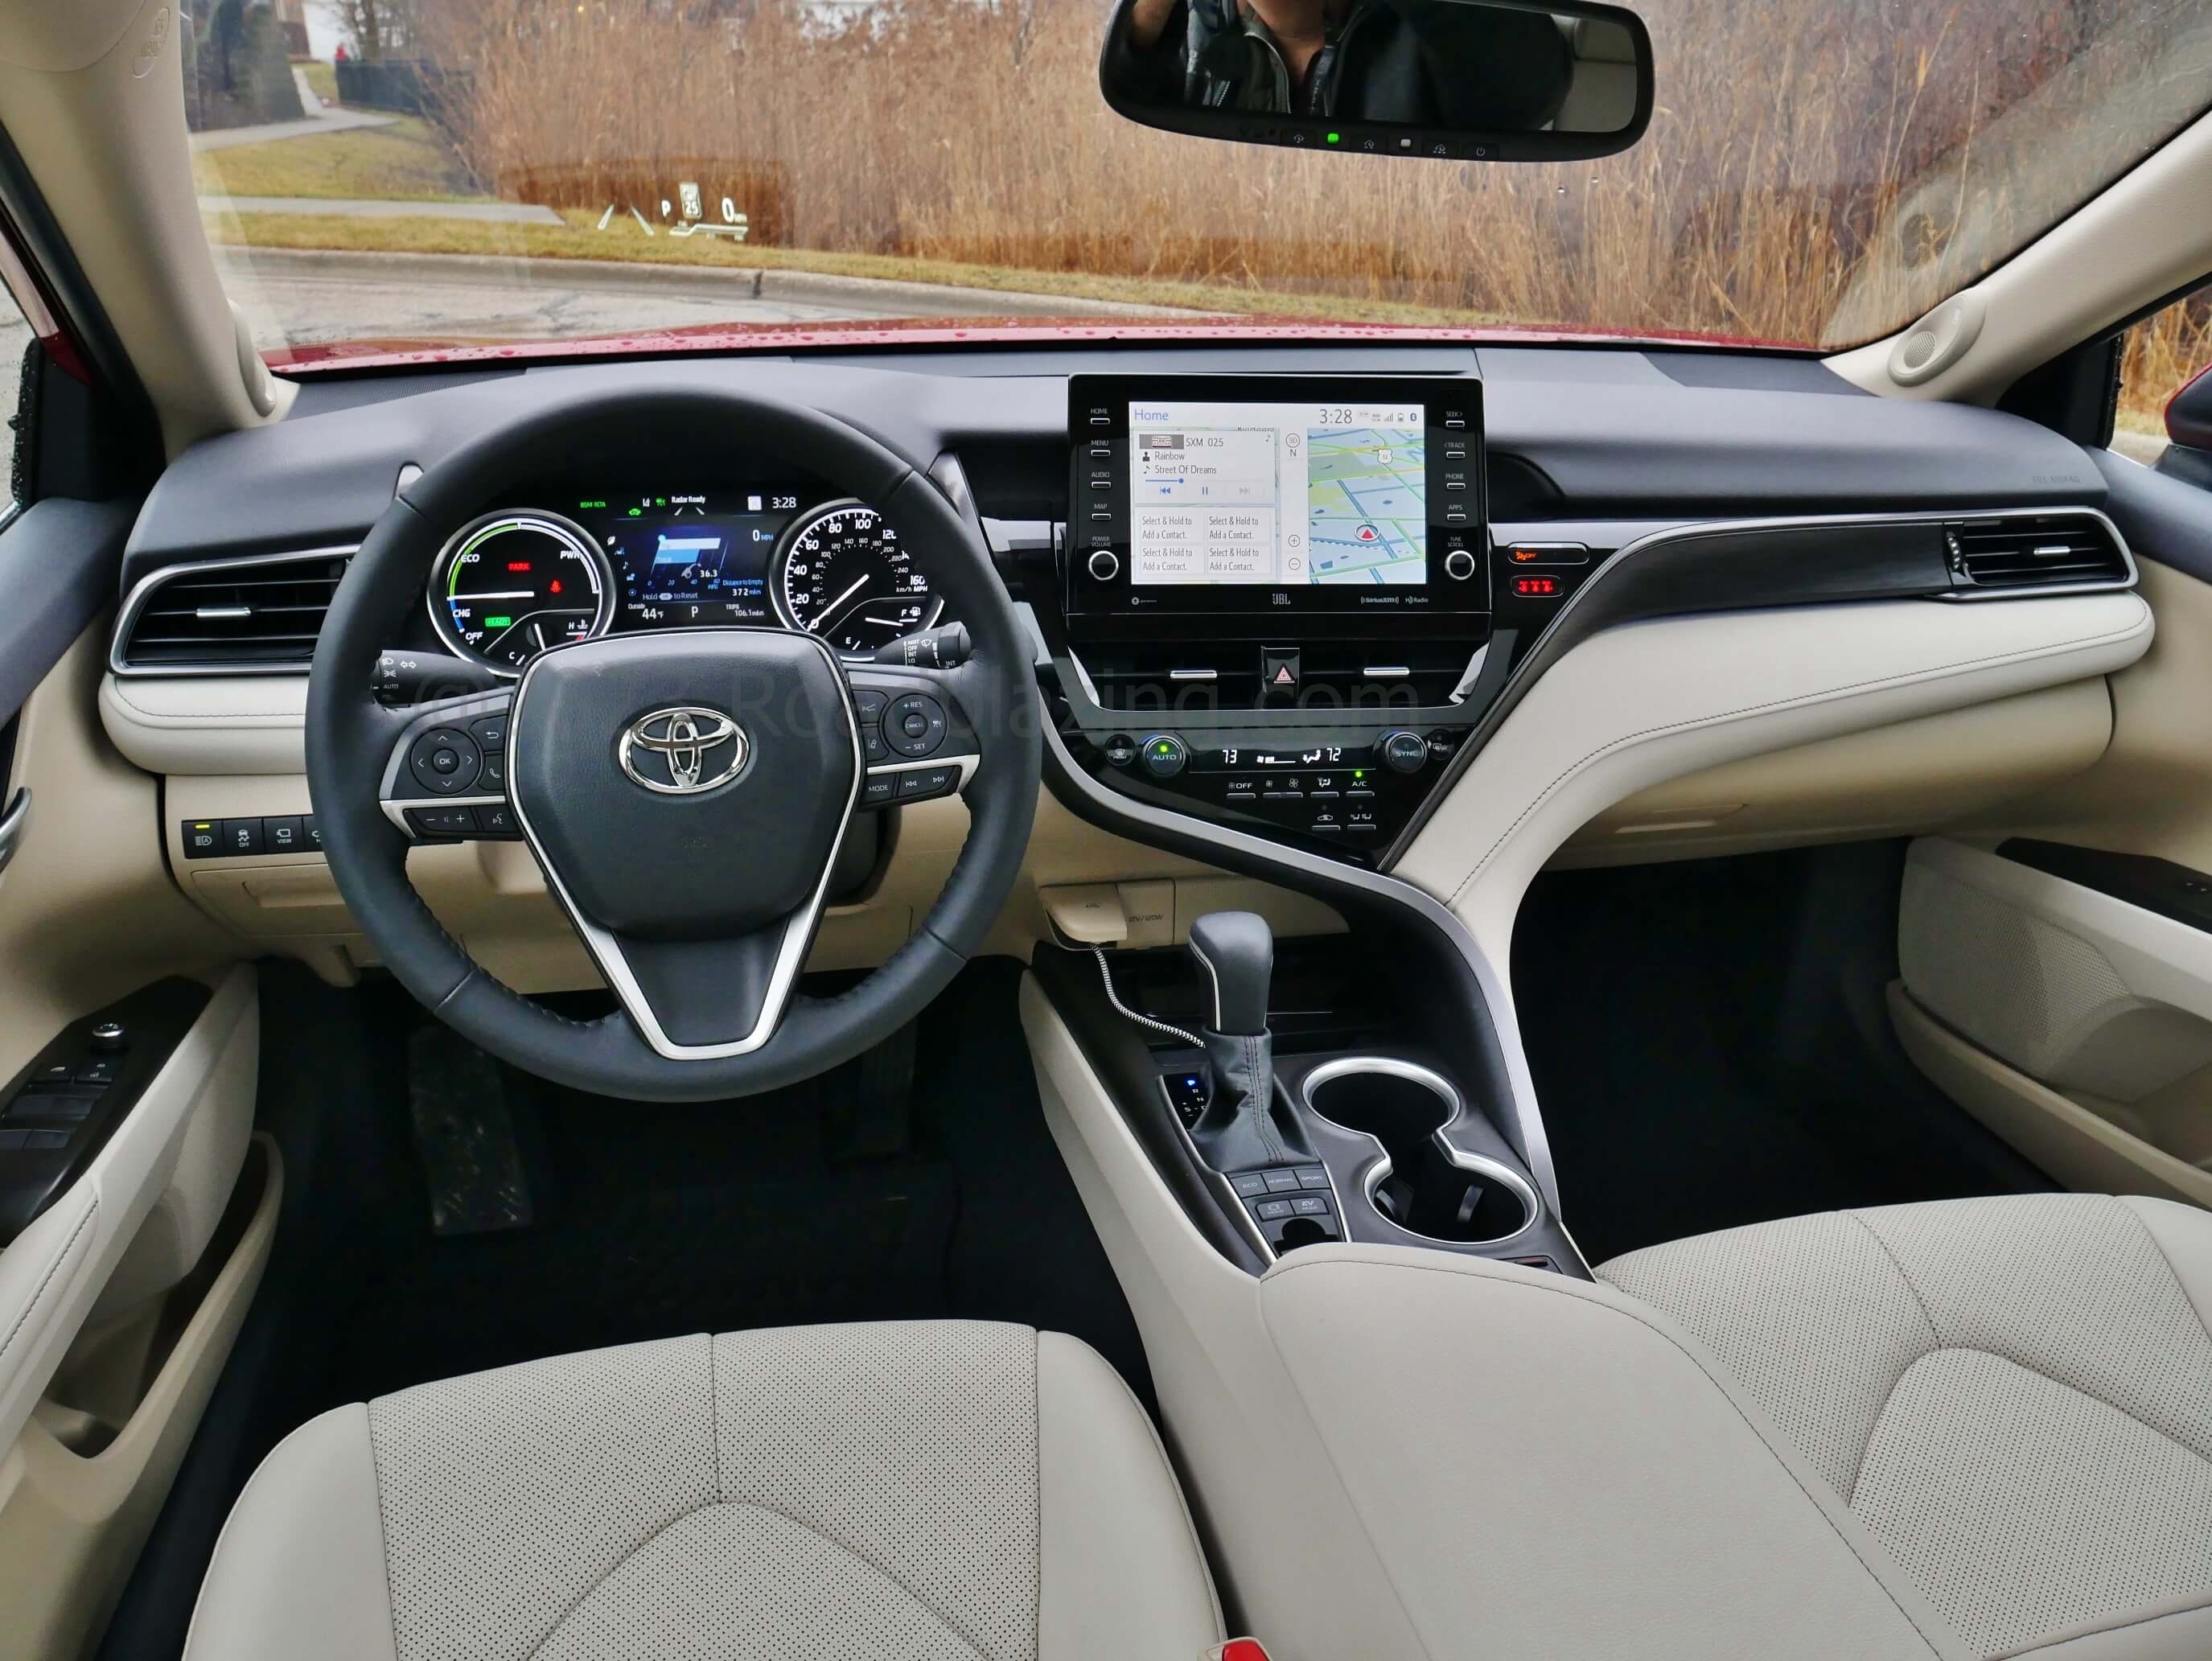 2023 Toyota Camry Hybrid XLE: tried and true blend of ELD twin analog gauges, pod mount touch media display in a soothing contrasted setting.